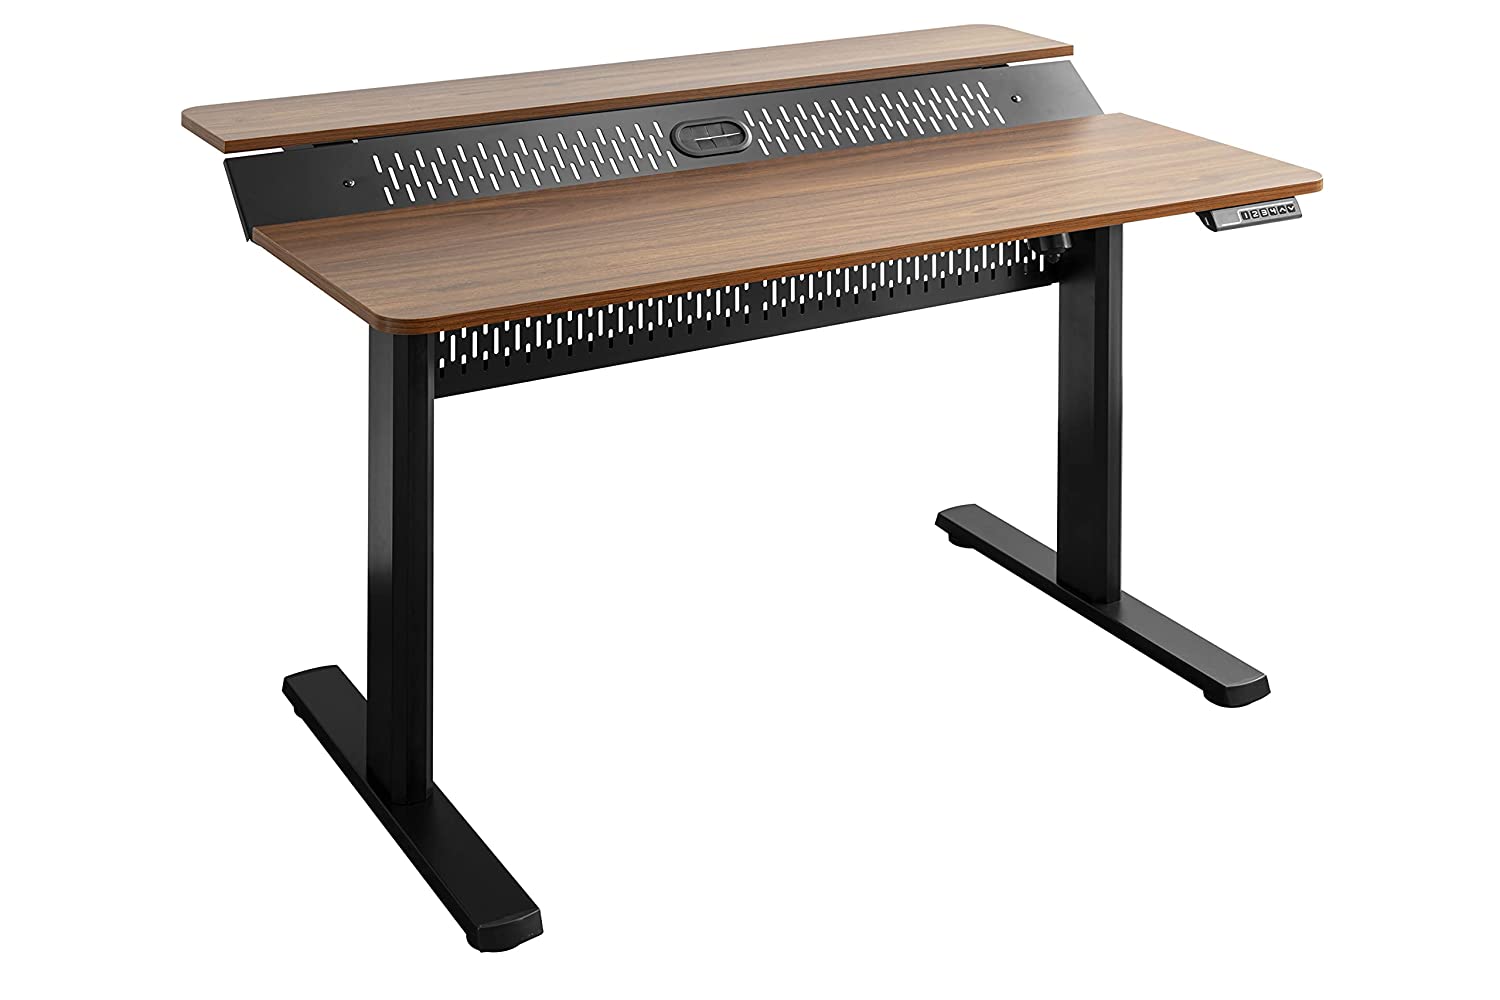 Jin Office Cast Iron Black Electric Height Adjustable Table Electric work desk With Additional Tier/Layer Shelf